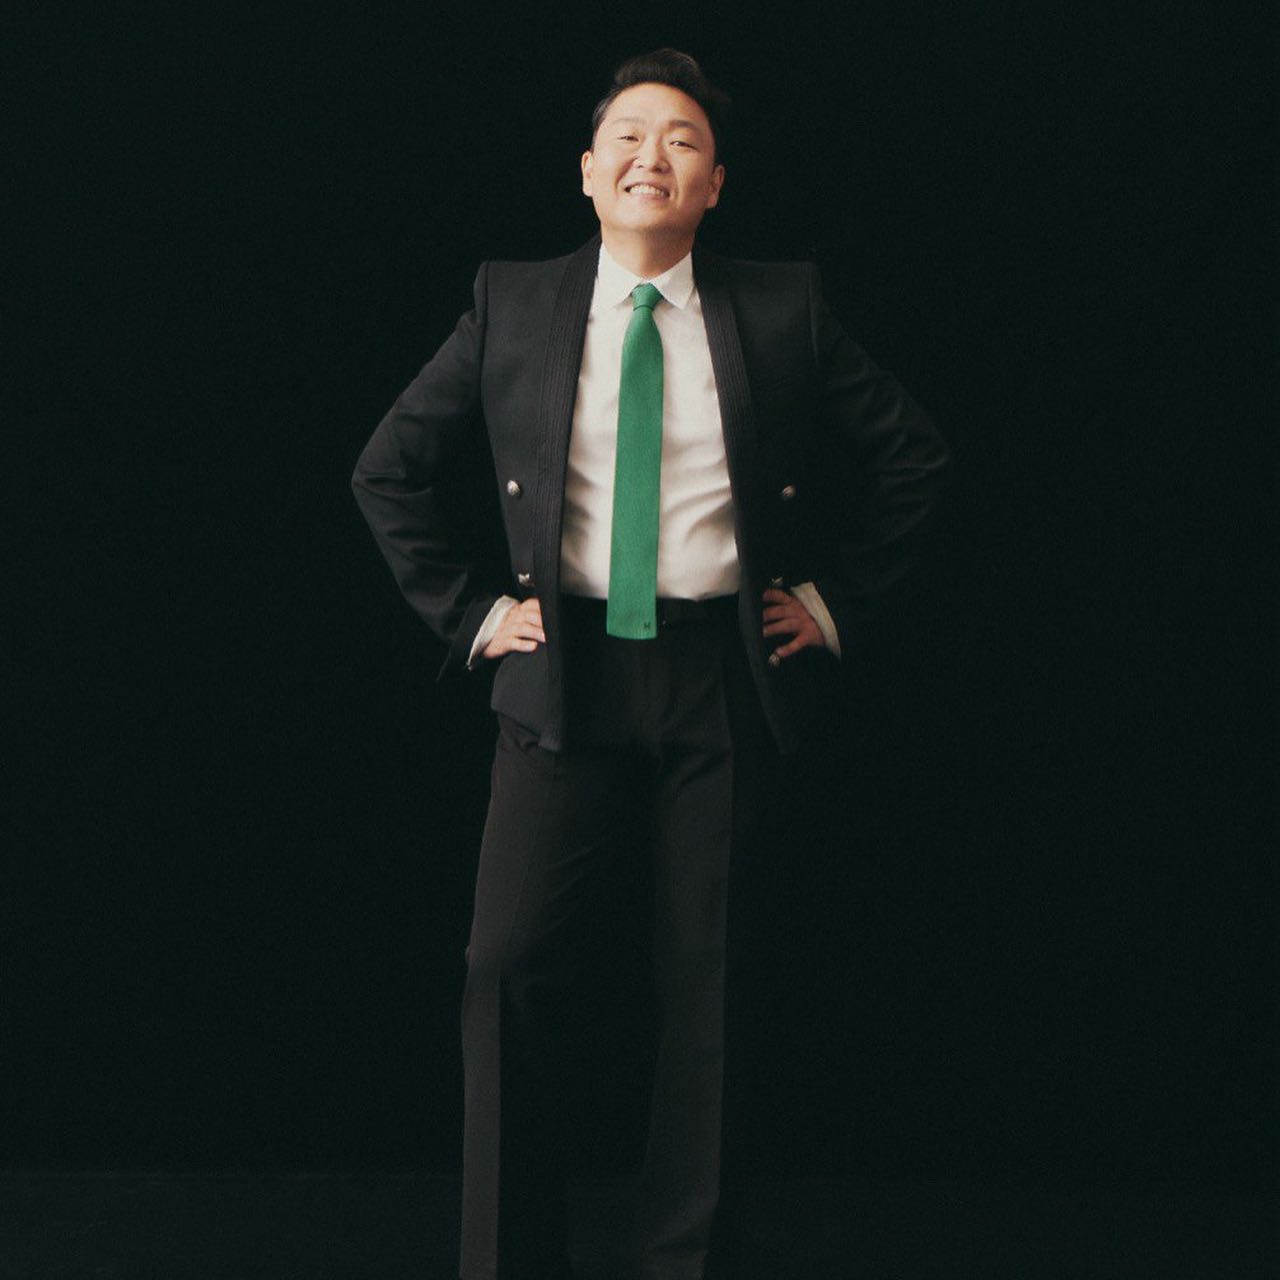 PSY Biography: Age, Net Worth, Height, Instagram, Wiki, Parents, Spouse, Siblings, Songs, Awards